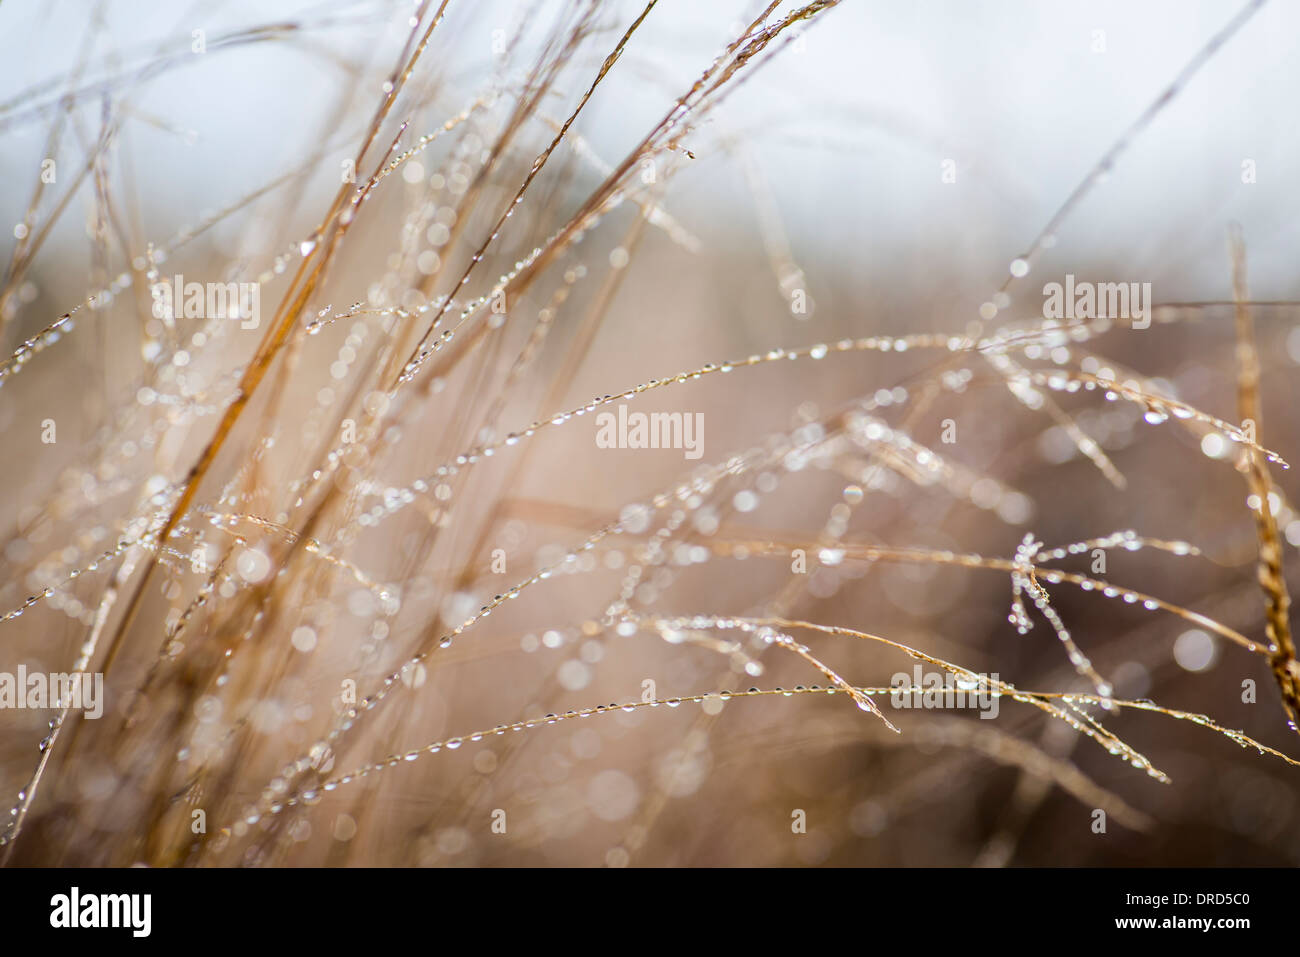 Dew drops on long grass. Stock Photo